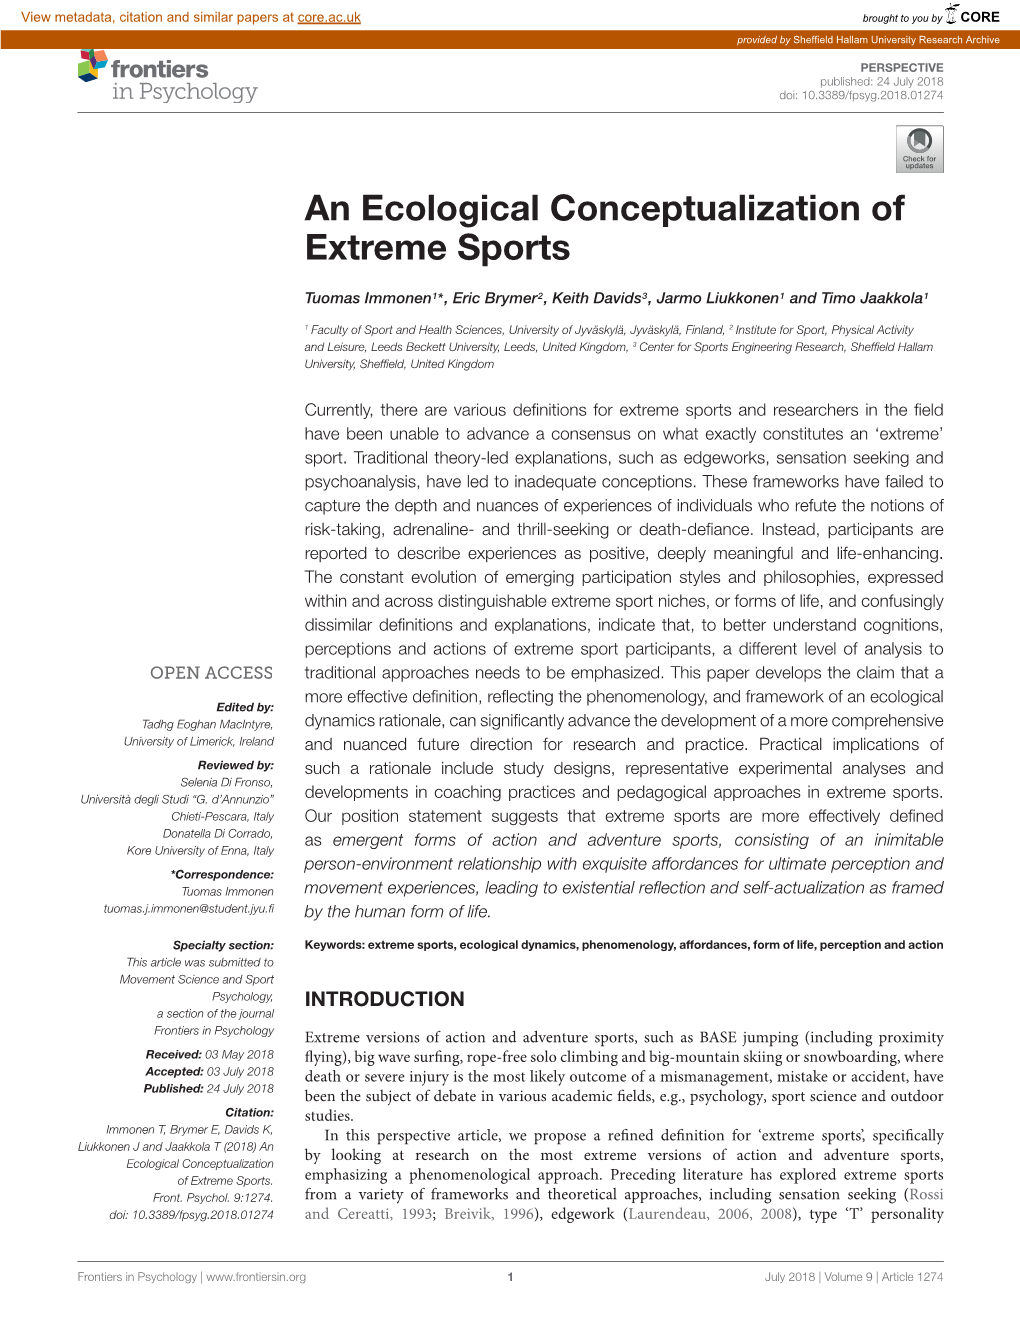 An Ecological Conceptualization of Extreme Sports